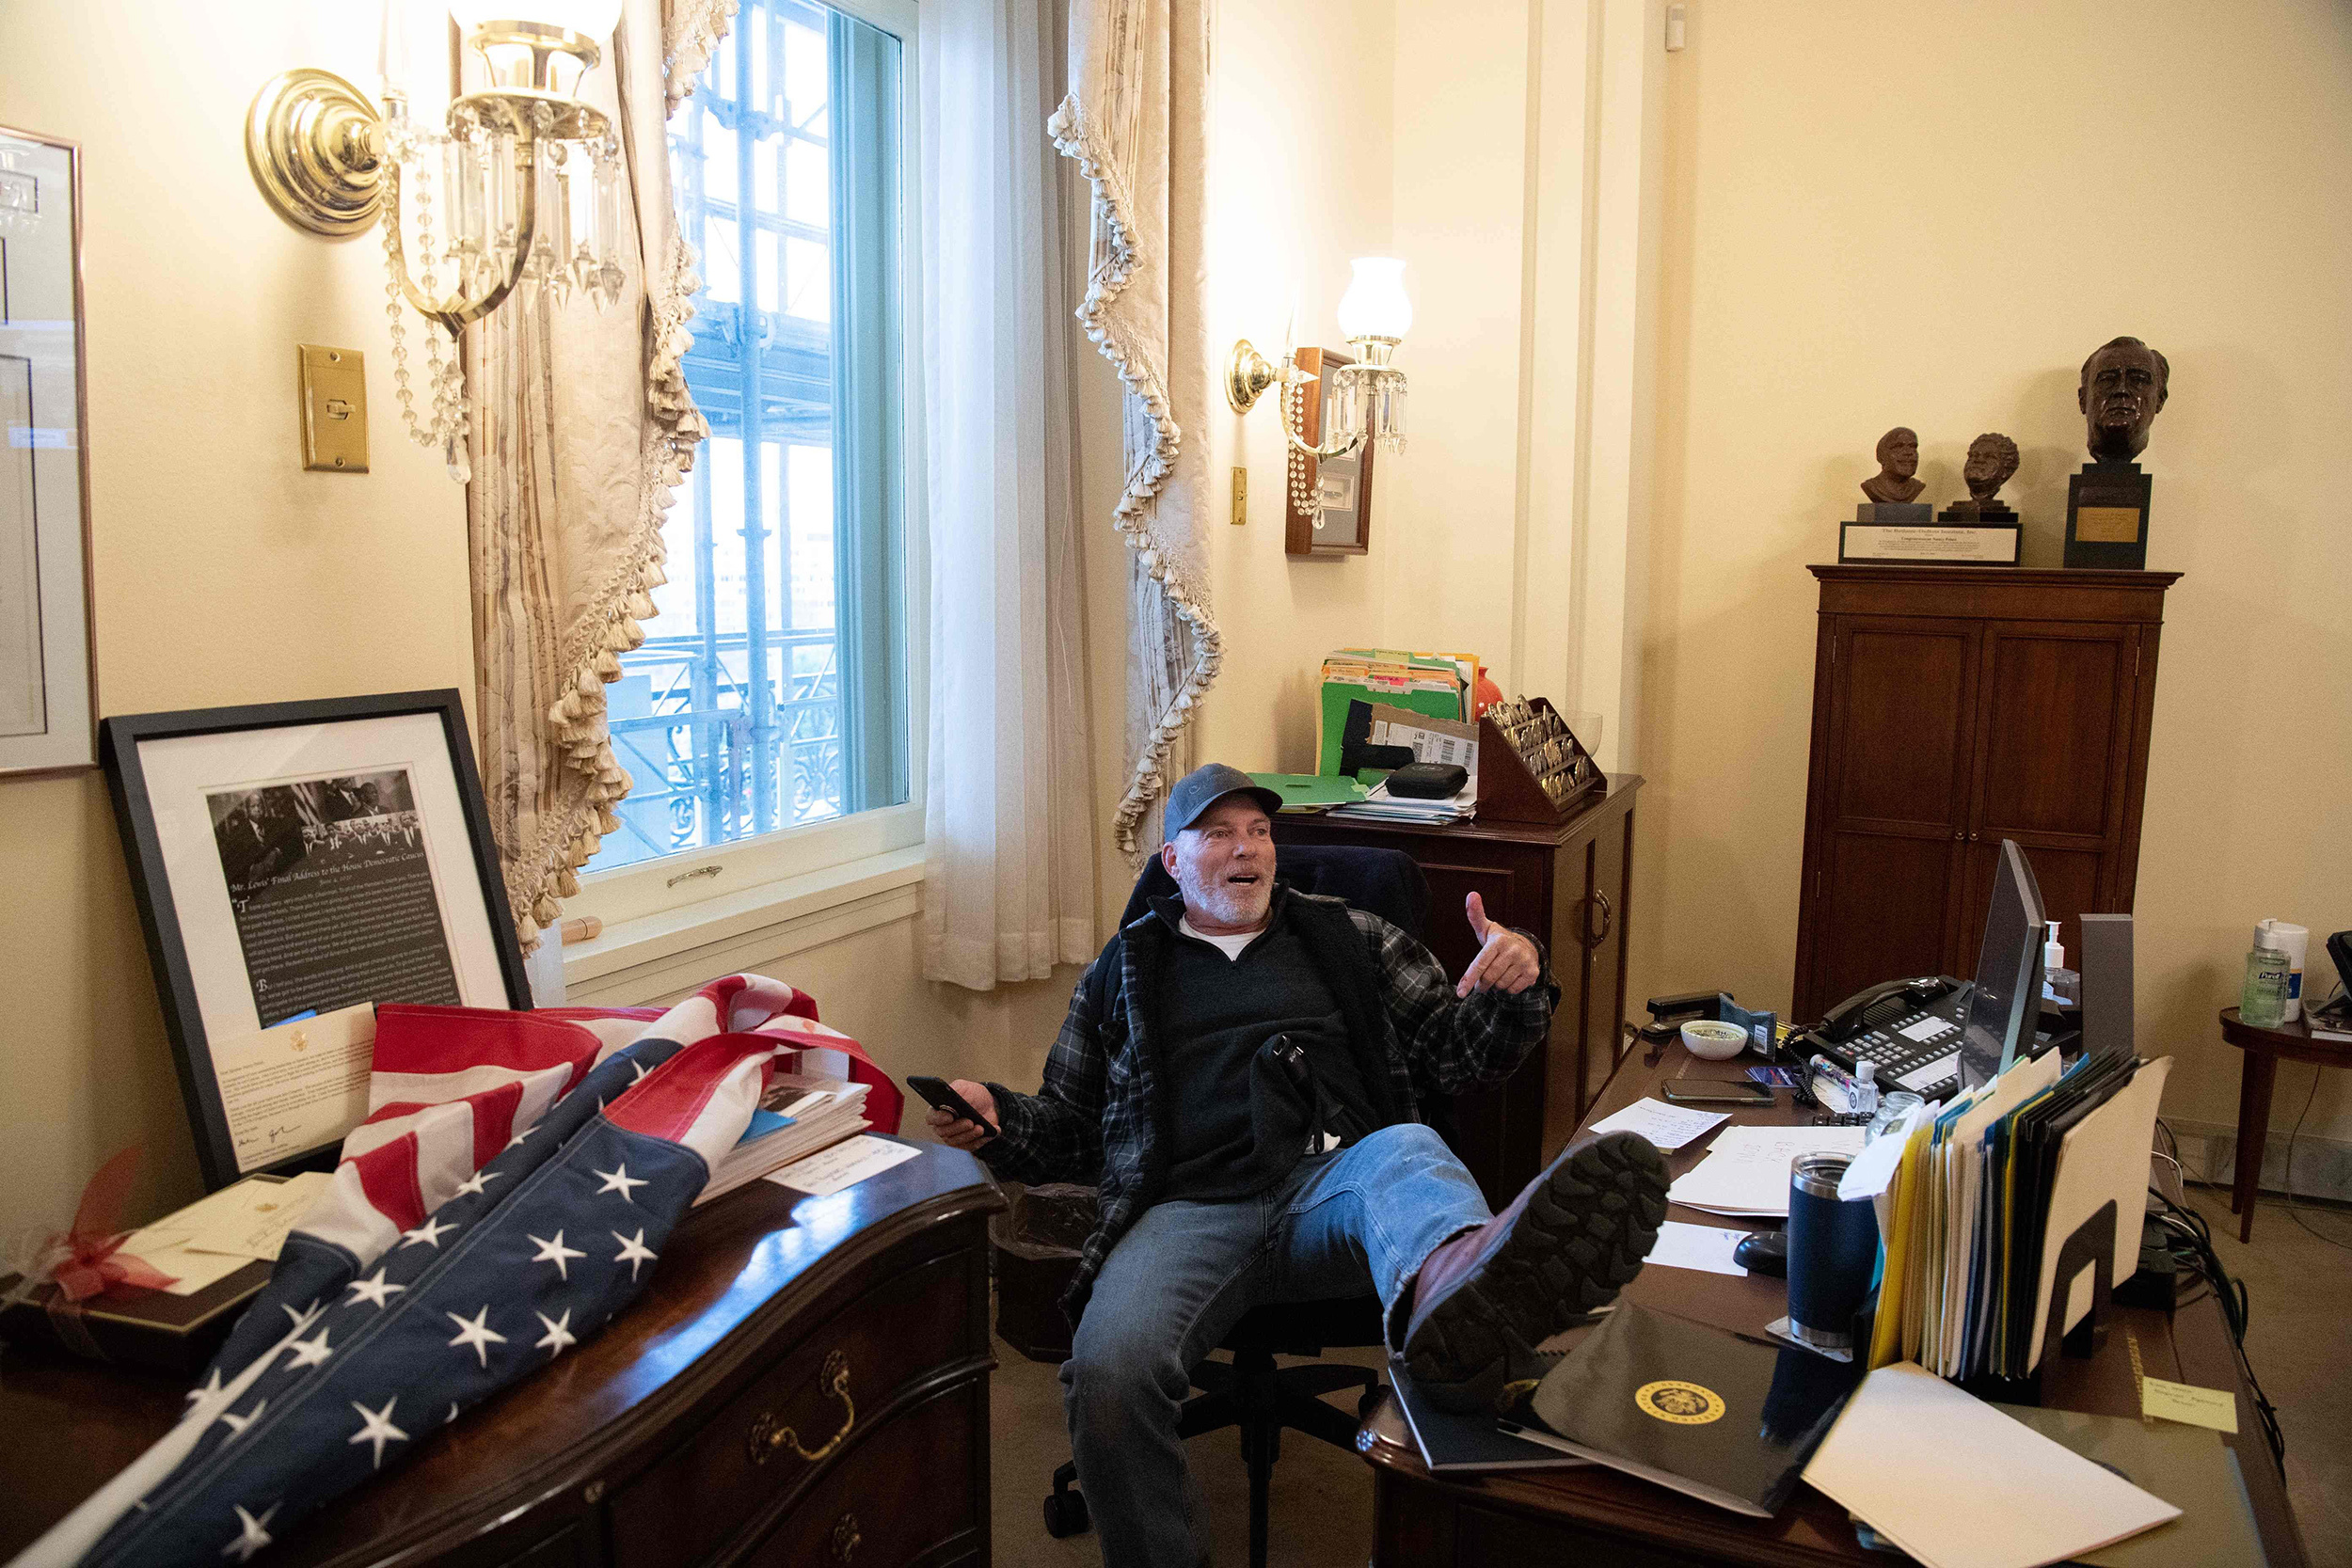 Man Photographed Sitting At A Desk In Pelosi’s Office Has Been Arrested